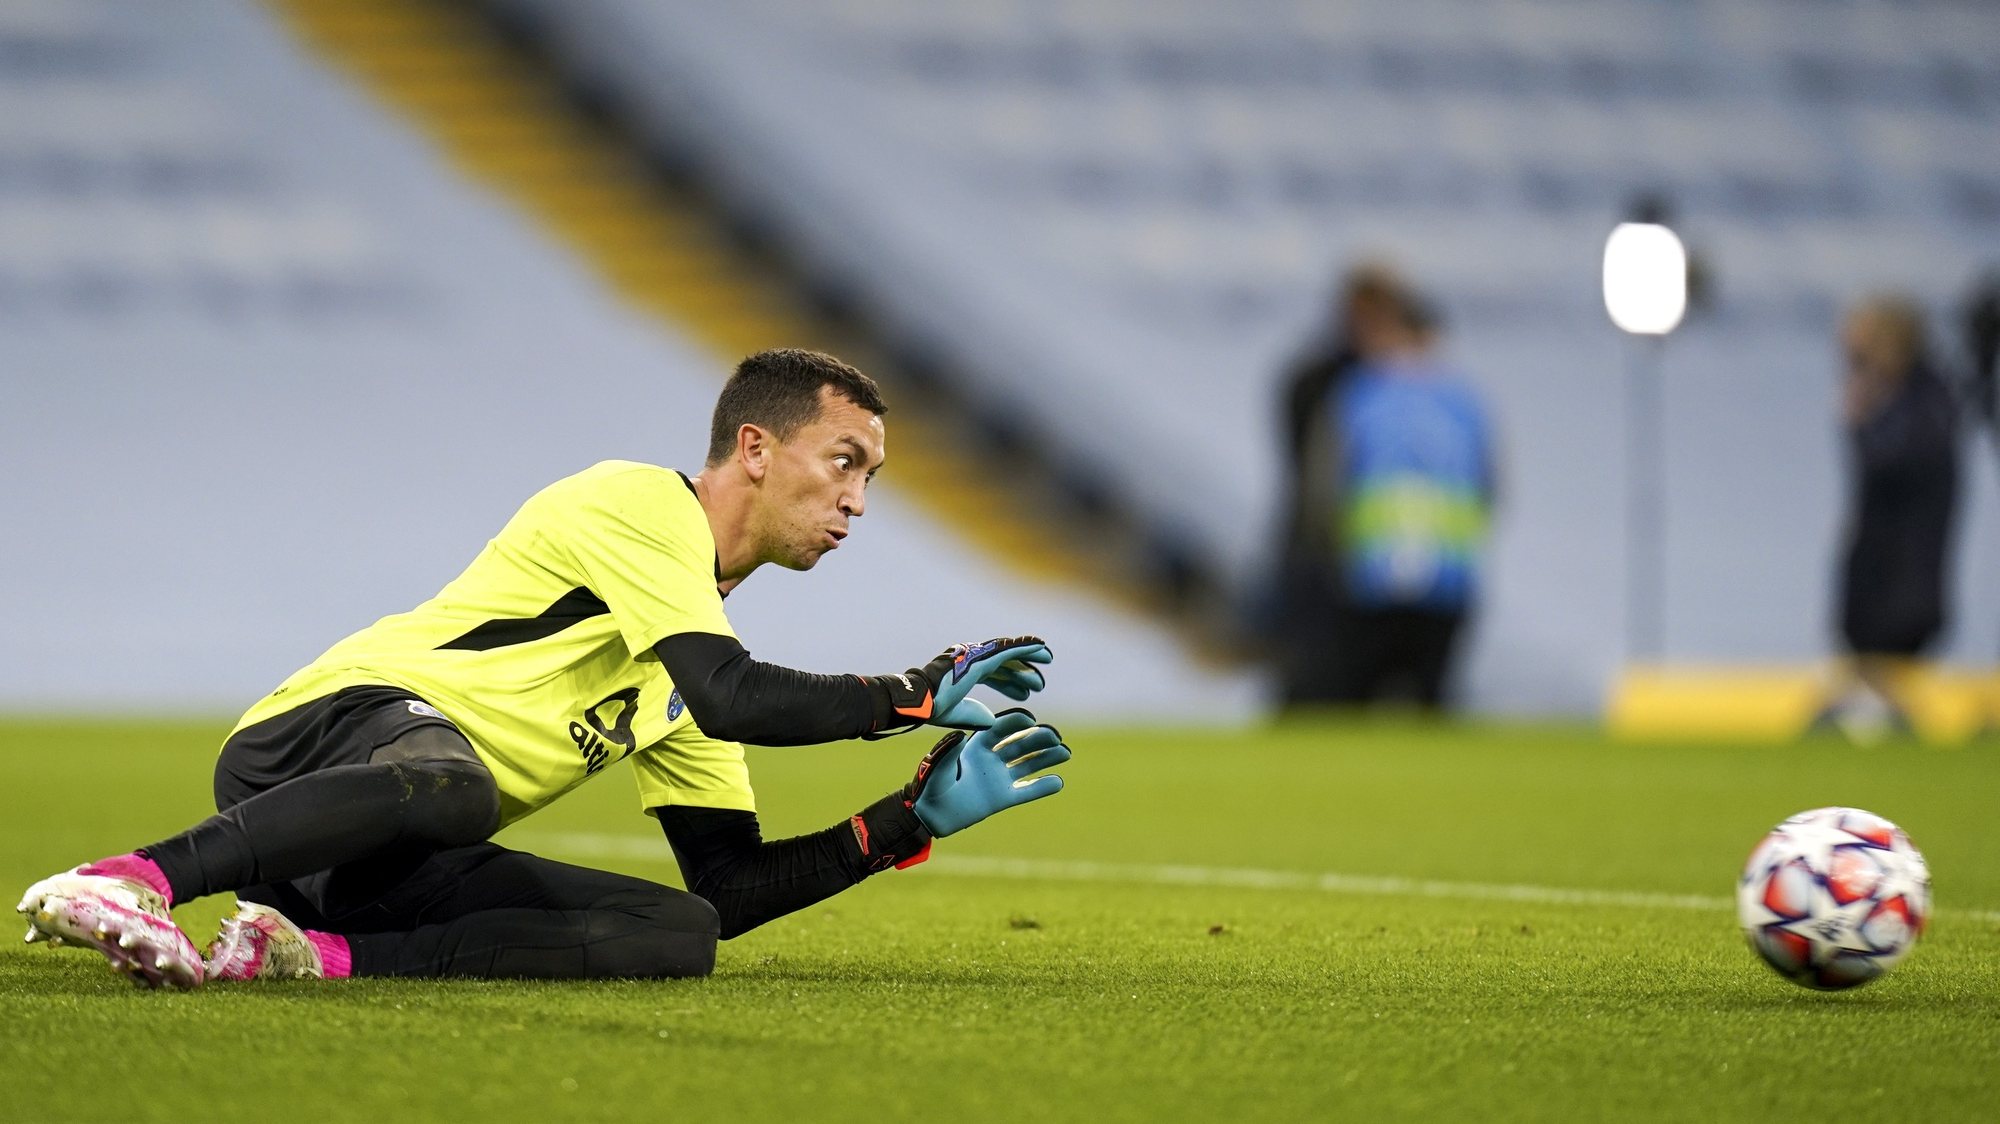 epa08762850 Goalkeeper Agustin Marchesin of Porto warms up prior to the UEFA Champions League group C soccer match between Manchester City and FC Porto in Manchester, Britain, 21 October 2020.  EPA/Tim Keeton / POOL